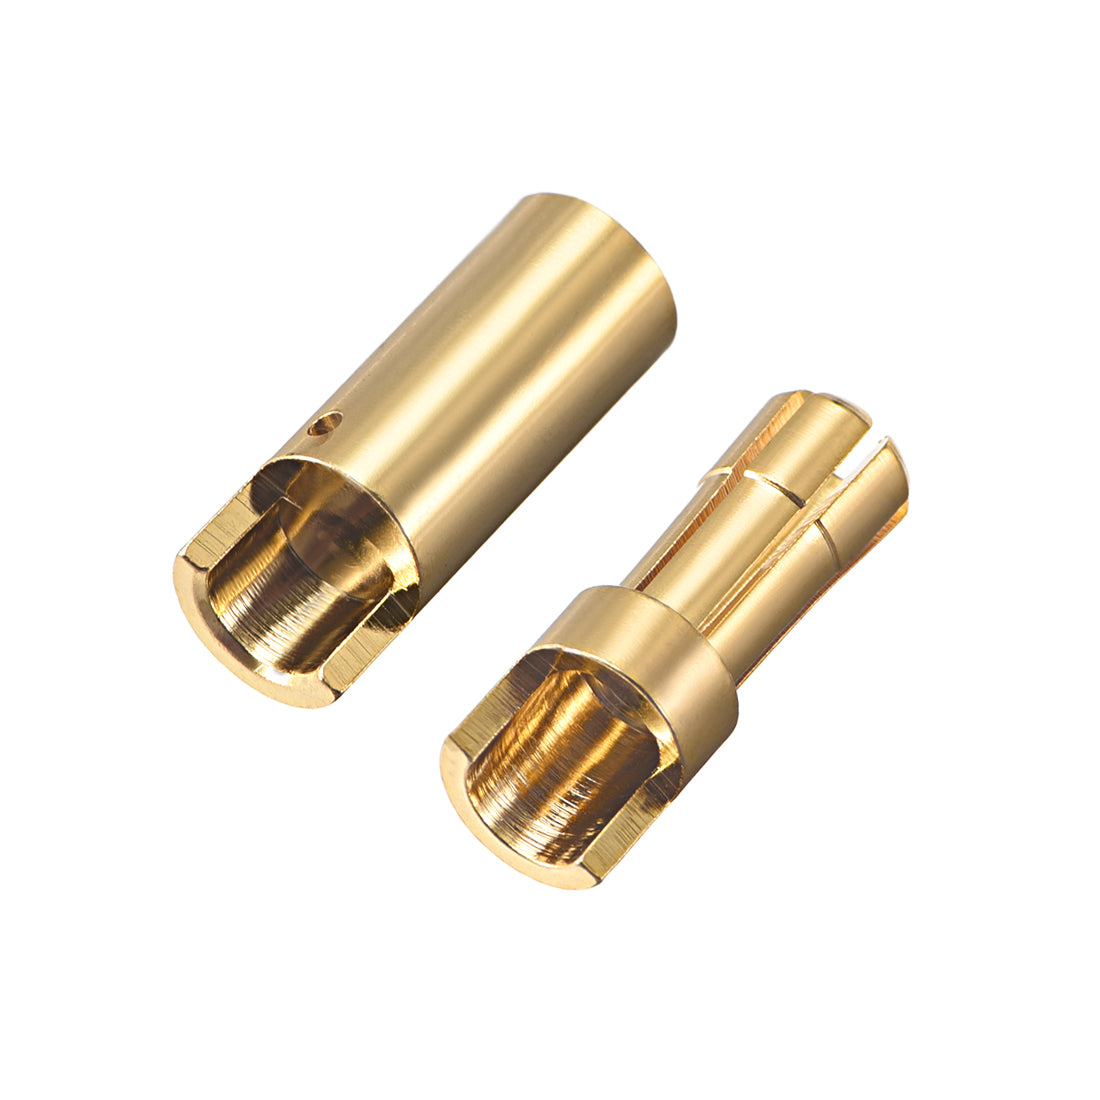 uxcell Uxcell 5.5mm Bullet Connector Gold Plated Banana Plugs Male&Female 3pairs